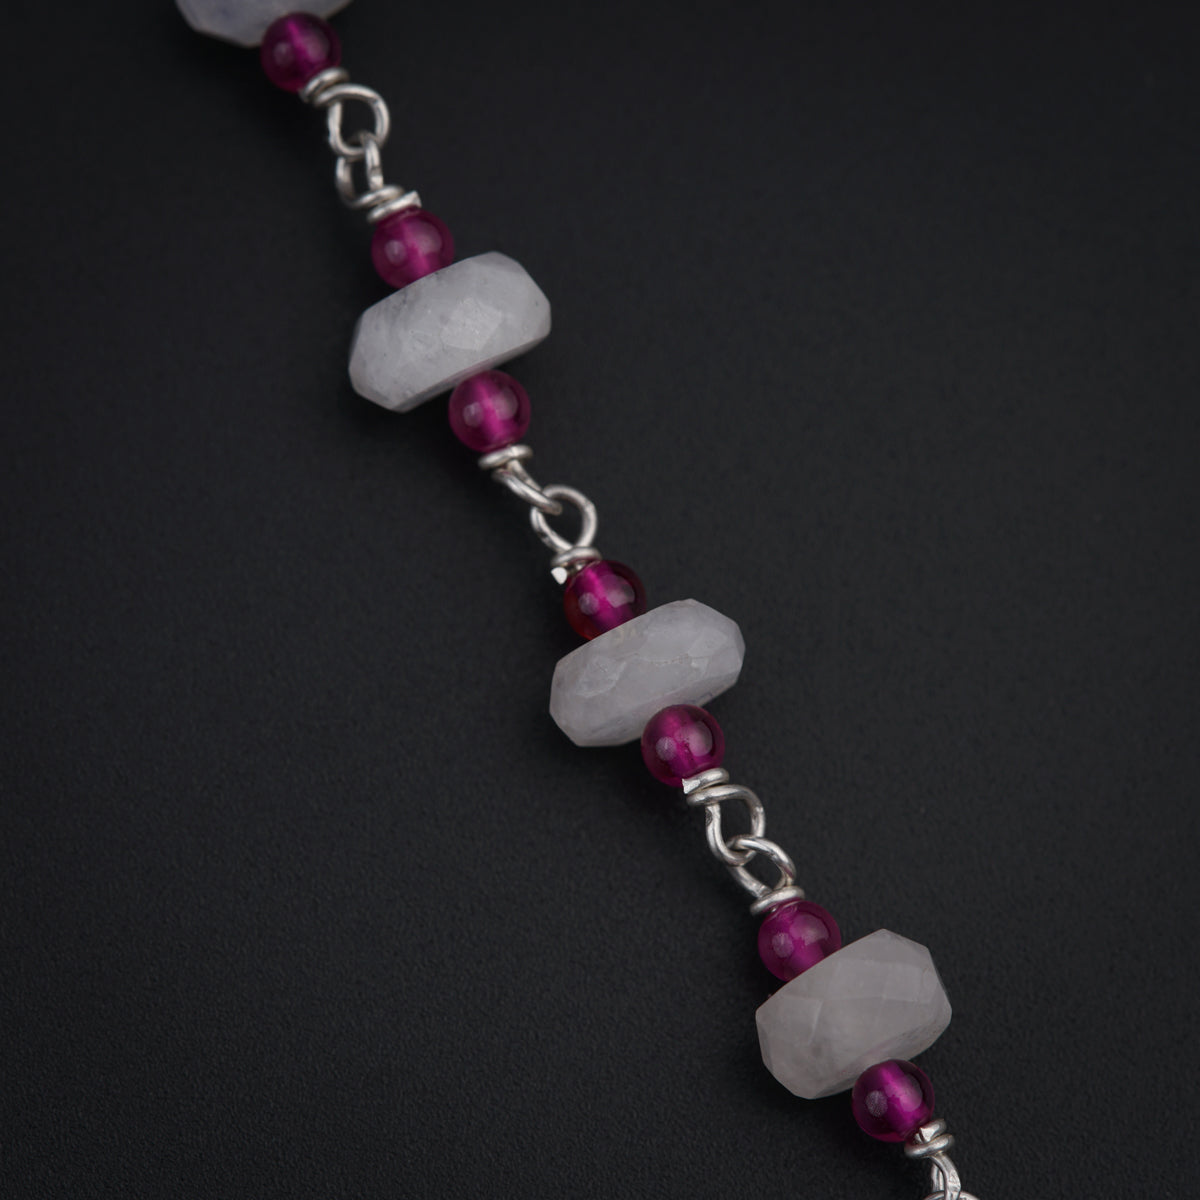 a bracelet with beads and a chain on a black surface